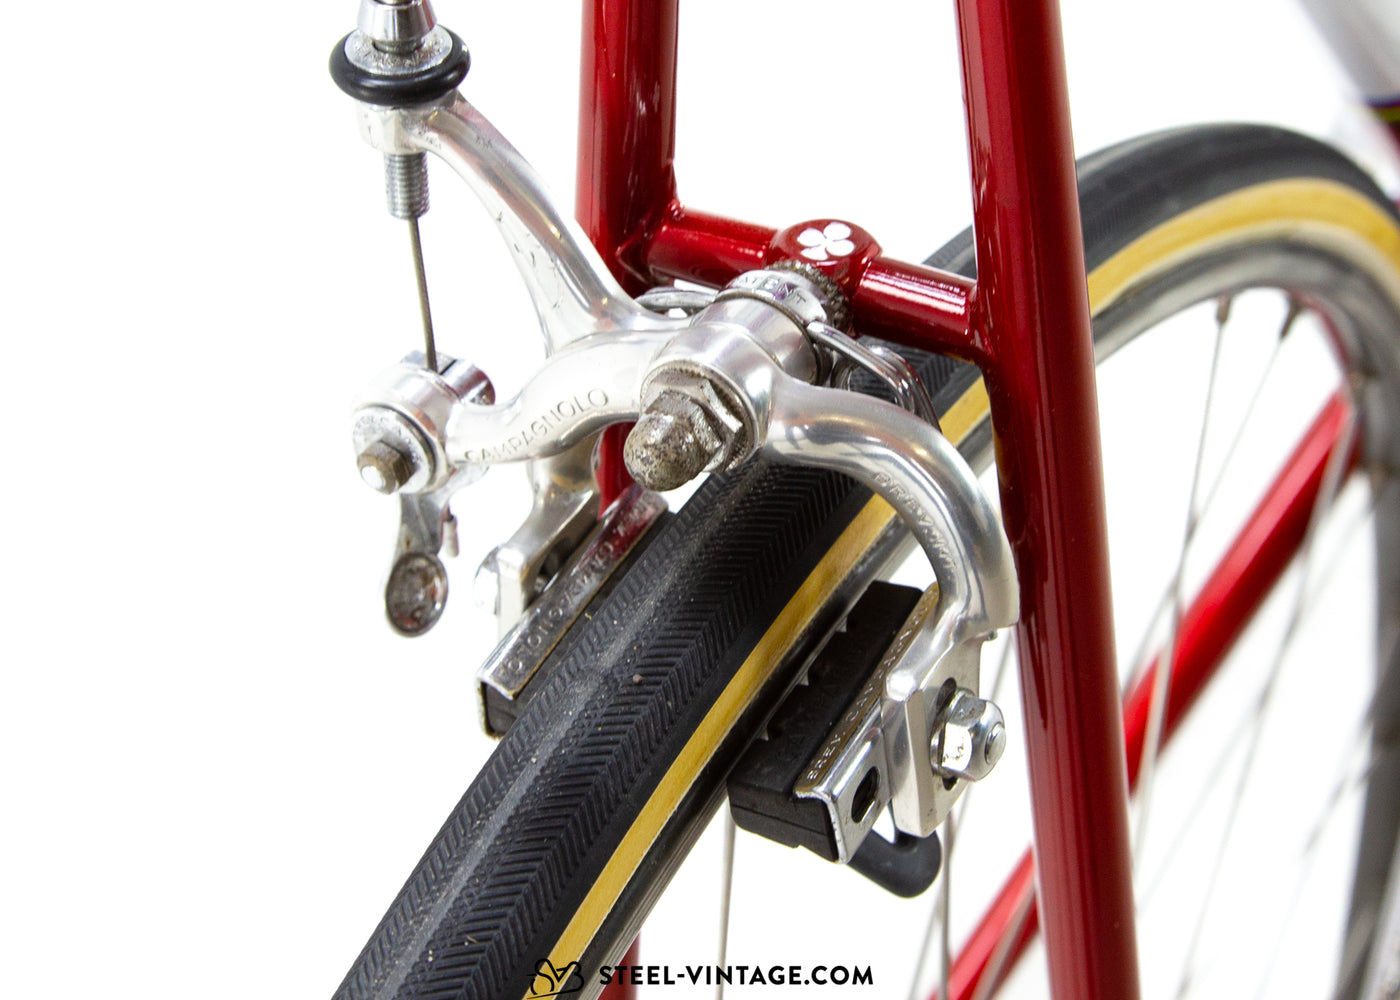 Colnago Super Saronni Red Road Bicycle 1980s